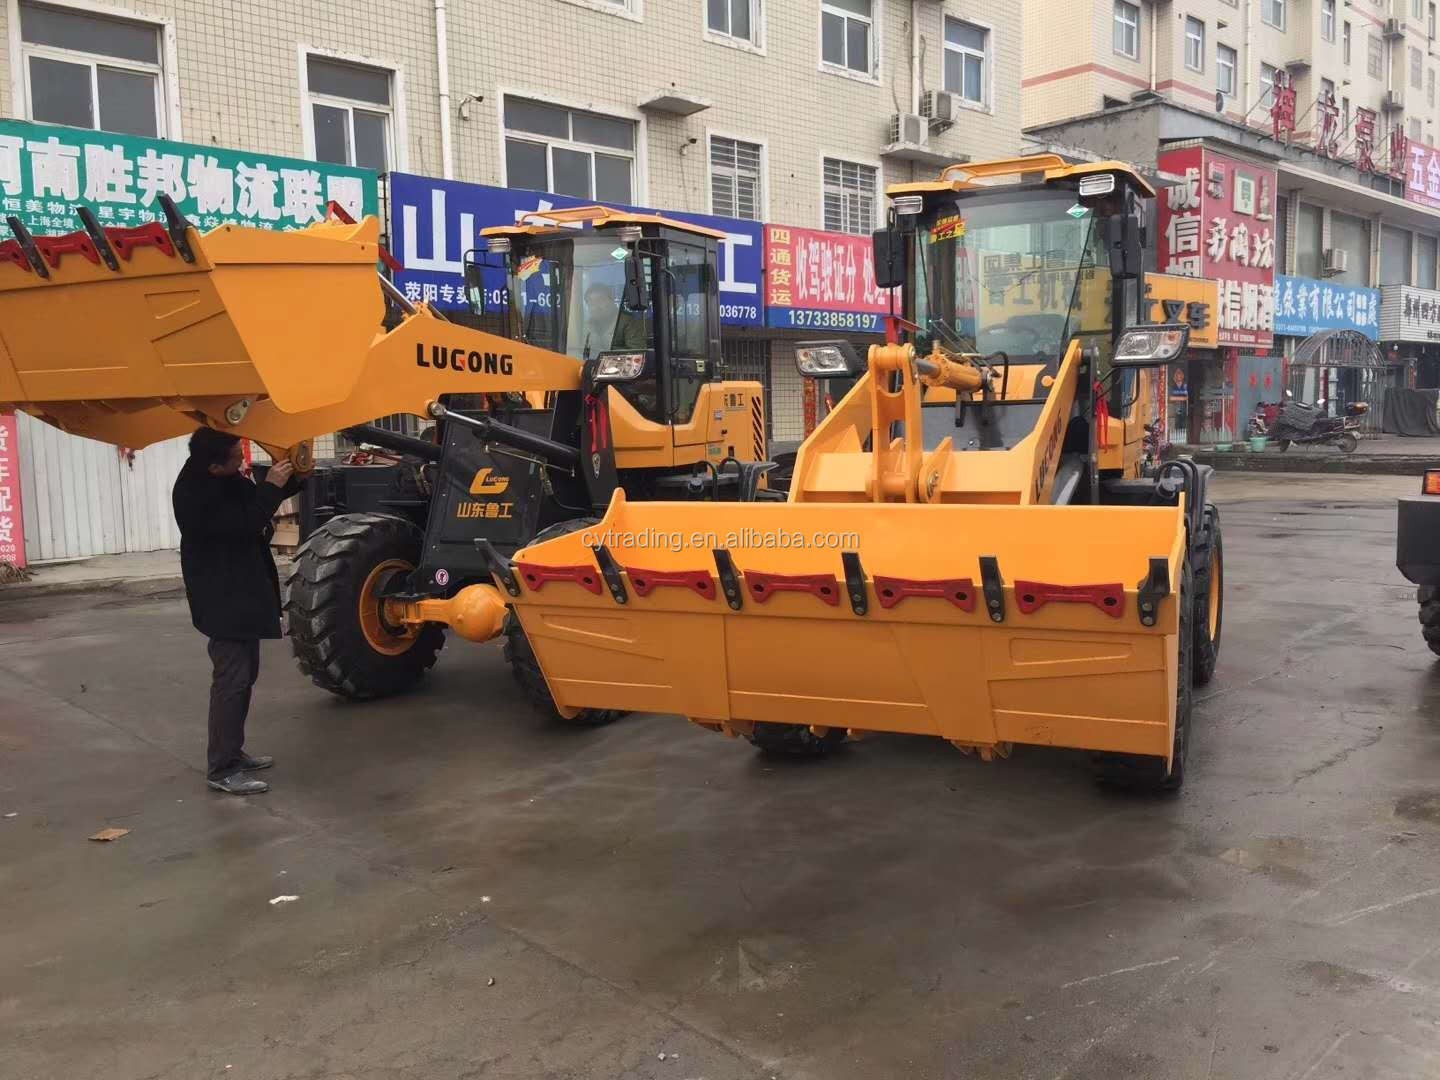 New China cheap price lugong front end mini wheel loader